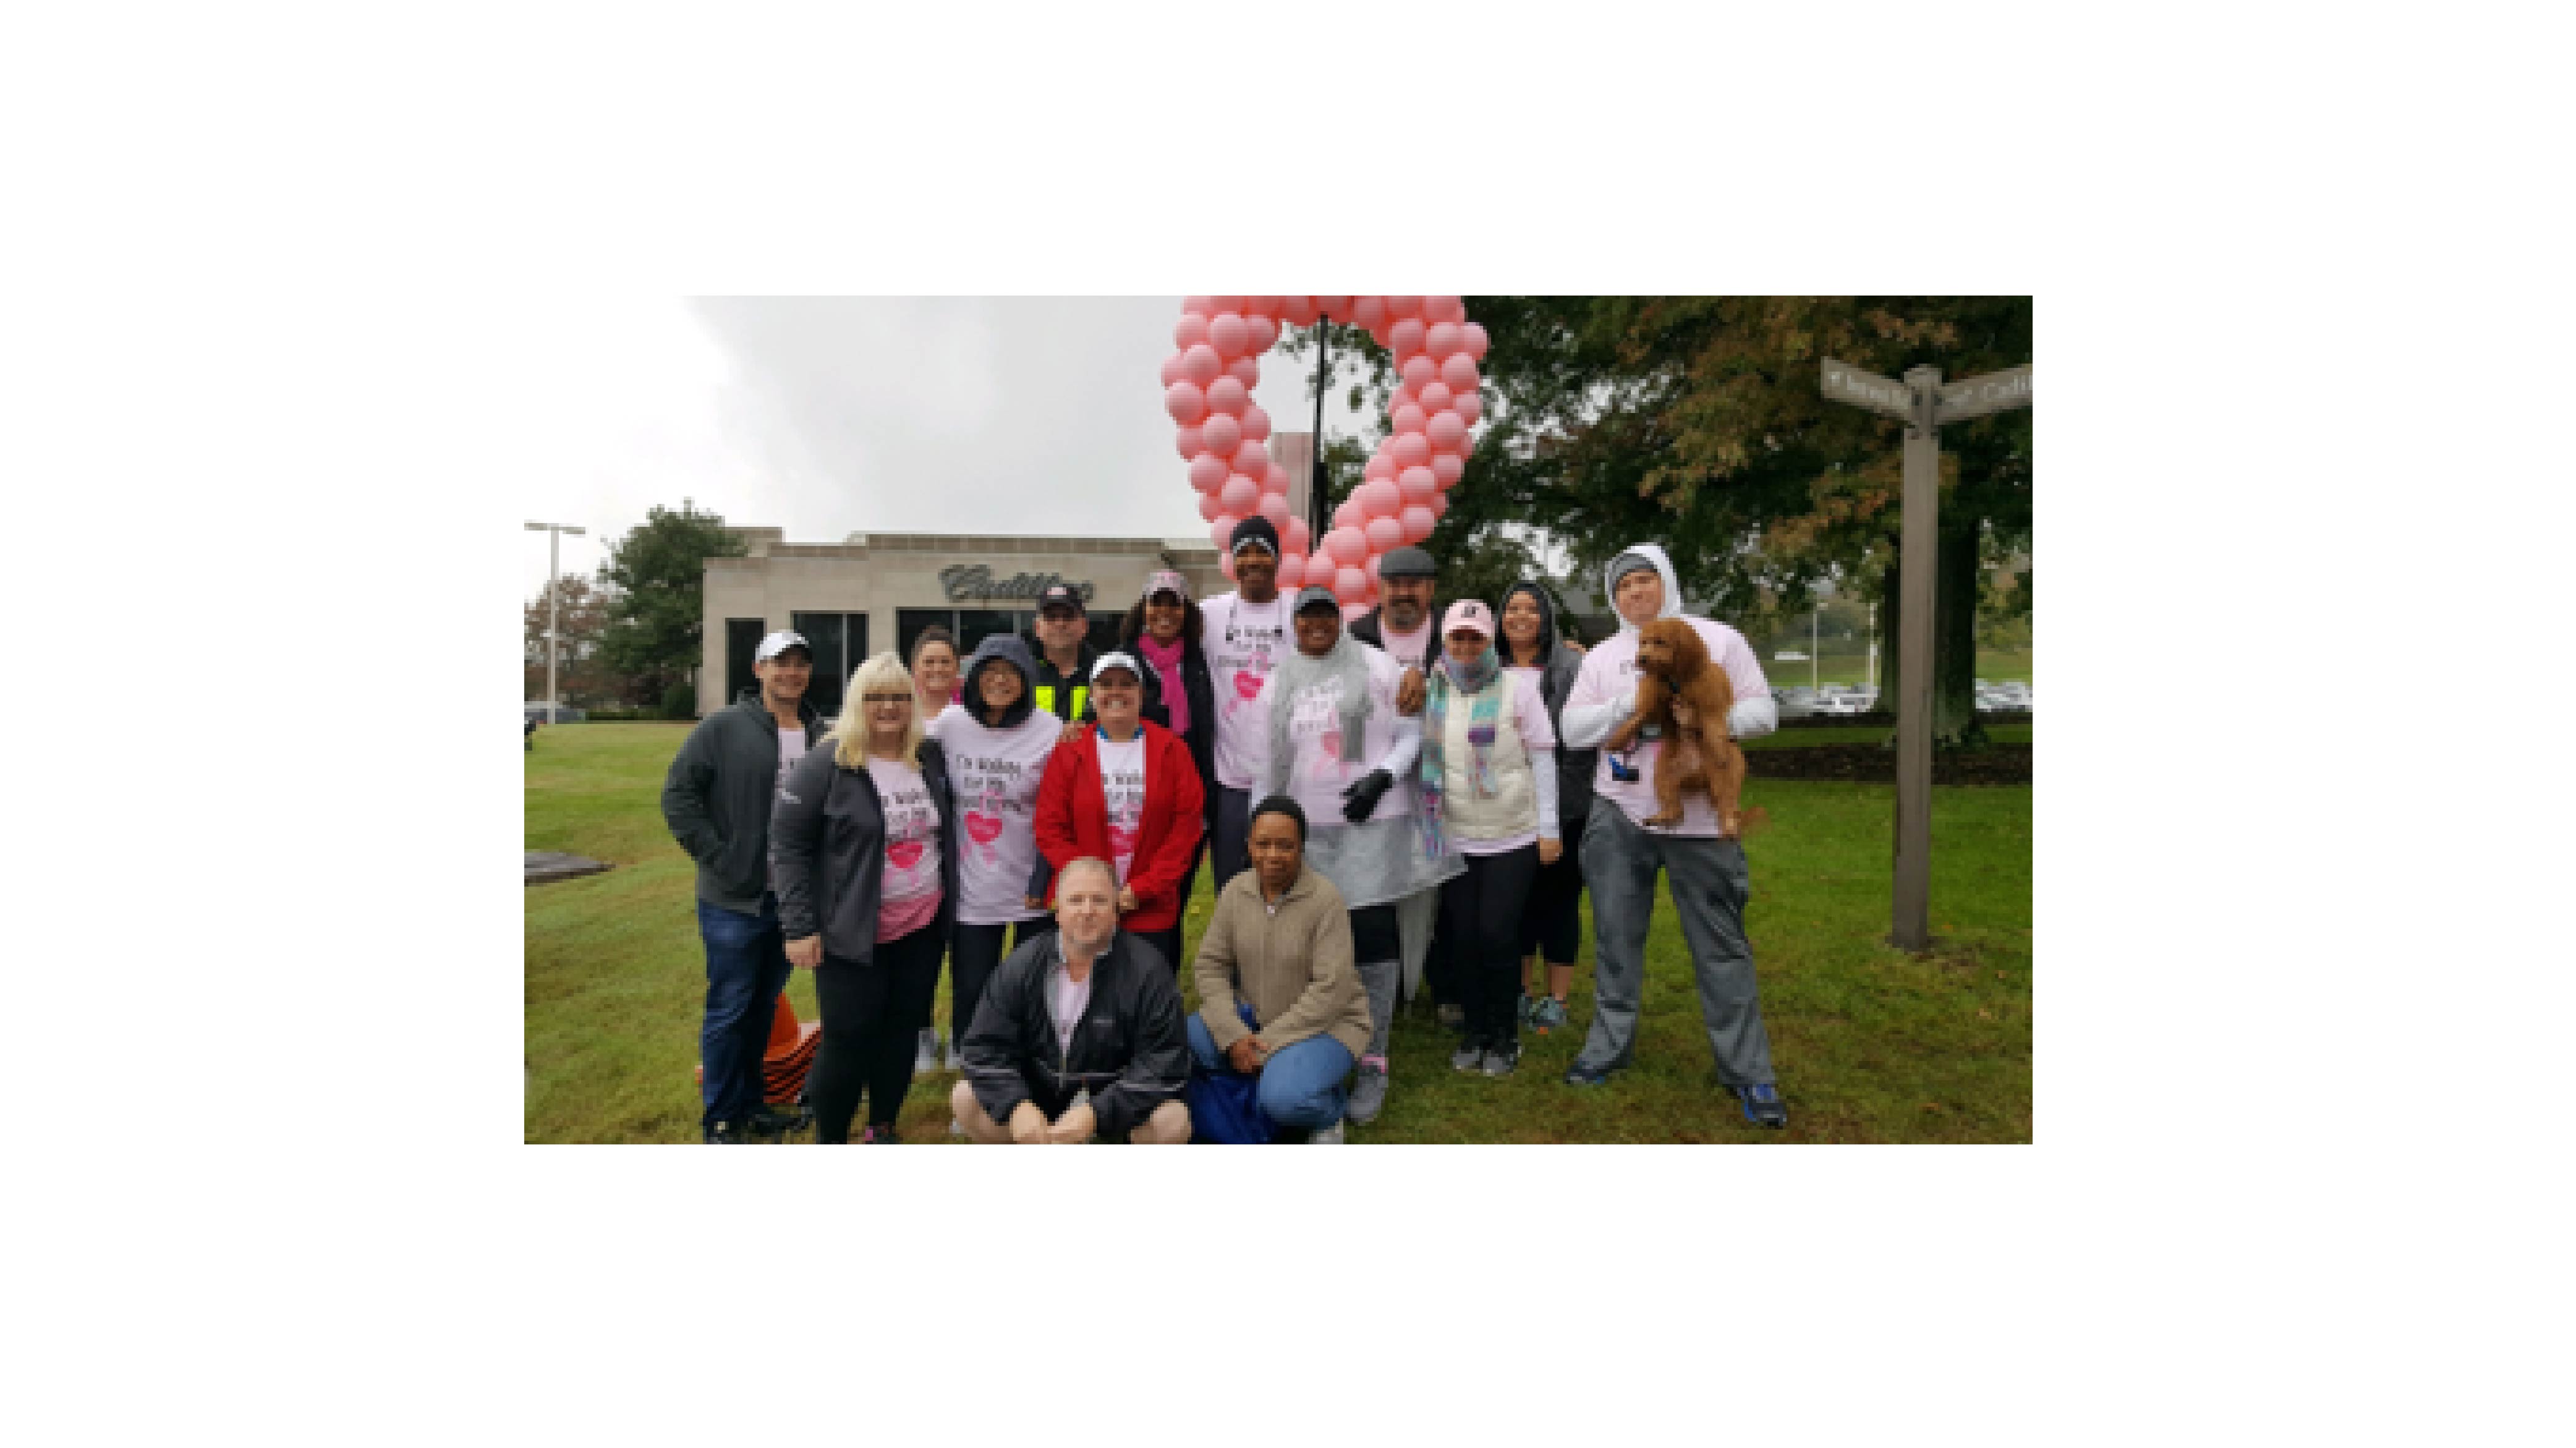 GCR employees race for the cure nashville, tn